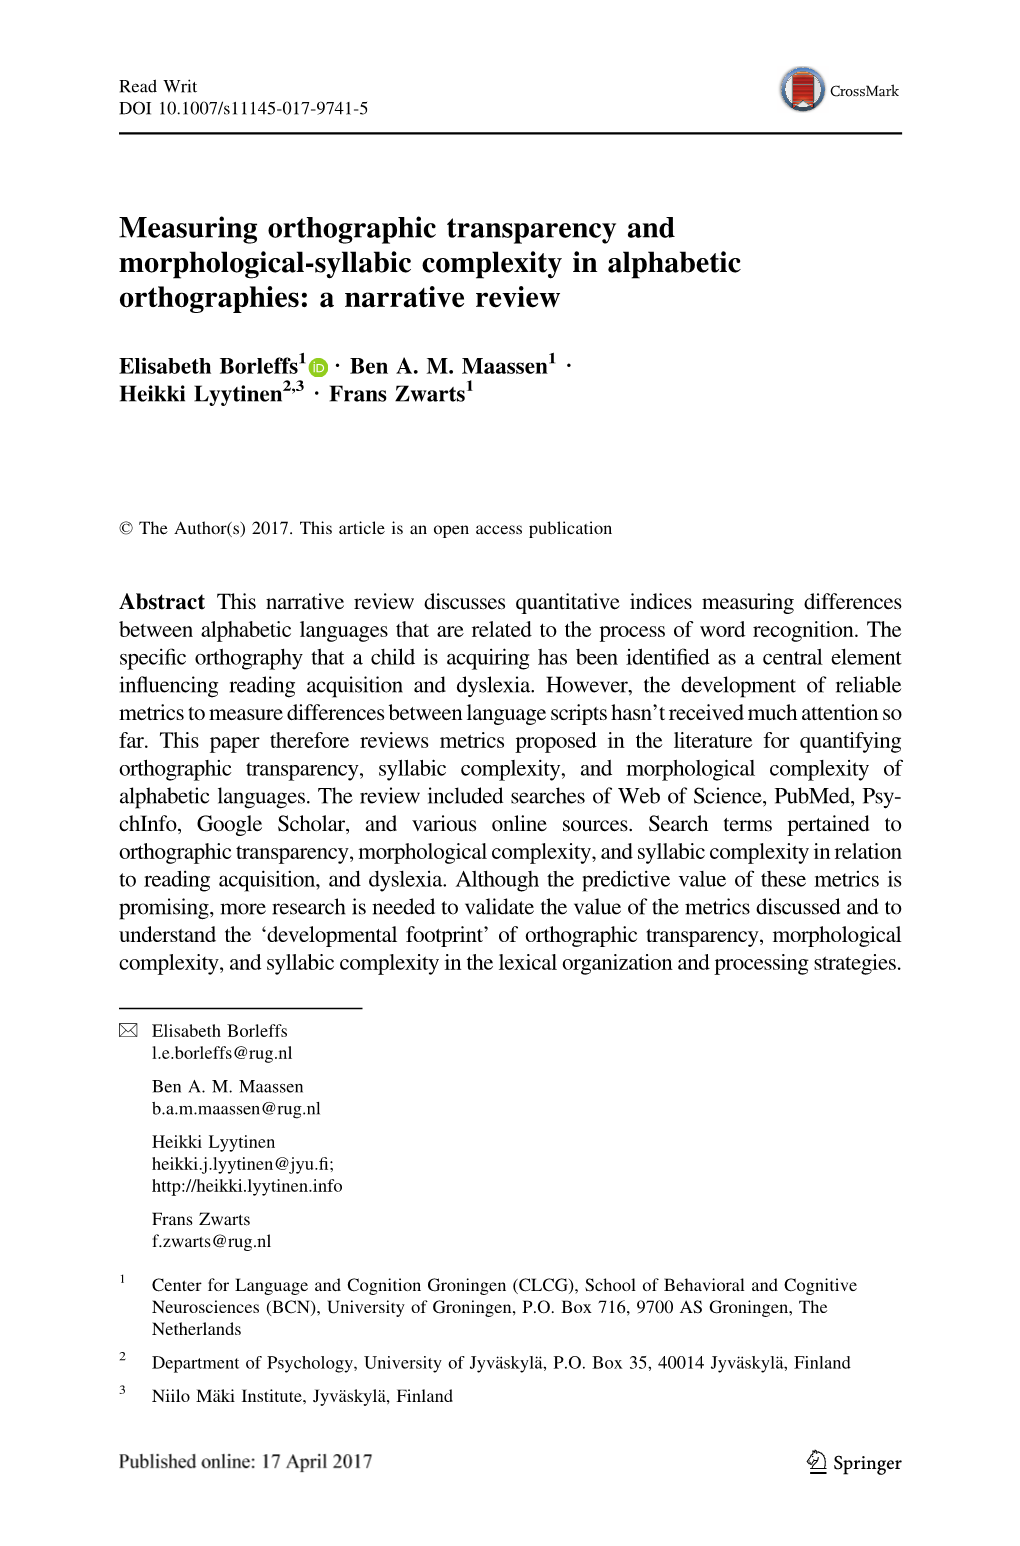 Measuring Orthographic Transparency and Morphological-Syllabic Complexity in Alphabetic Orthographies: a Narrative Review